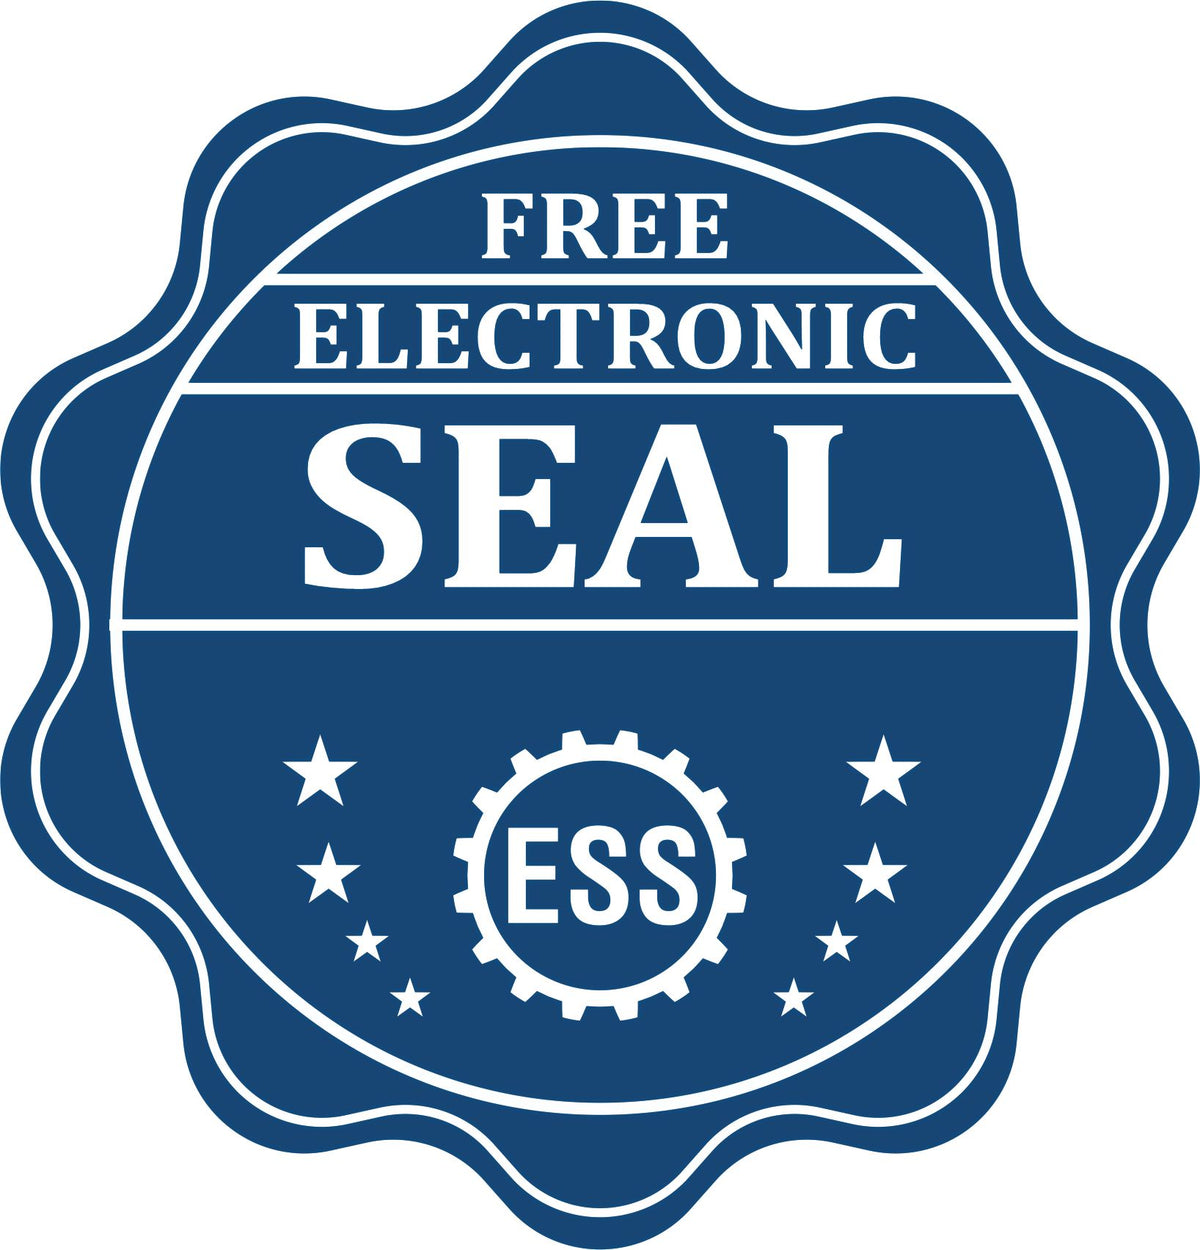 A badge showing a free electronic seal for the Heavy Duty Cast Iron Arizona Engineer Seal Embosser with stars and the ESS gear on the emblem.